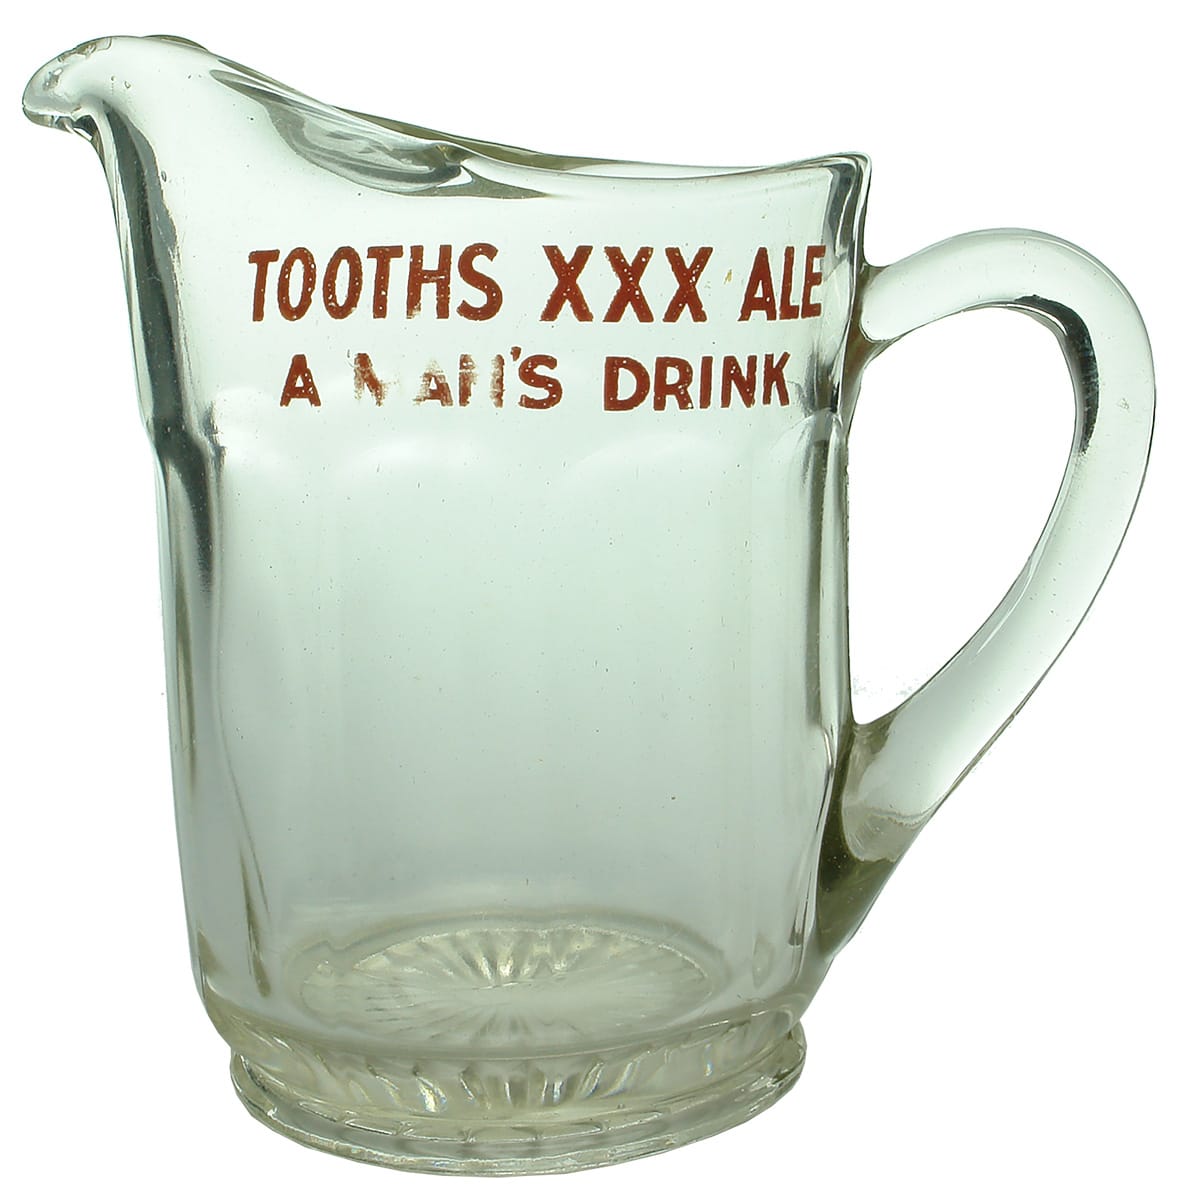 Tooths XXX Ale A Man's Drink Beer Jug